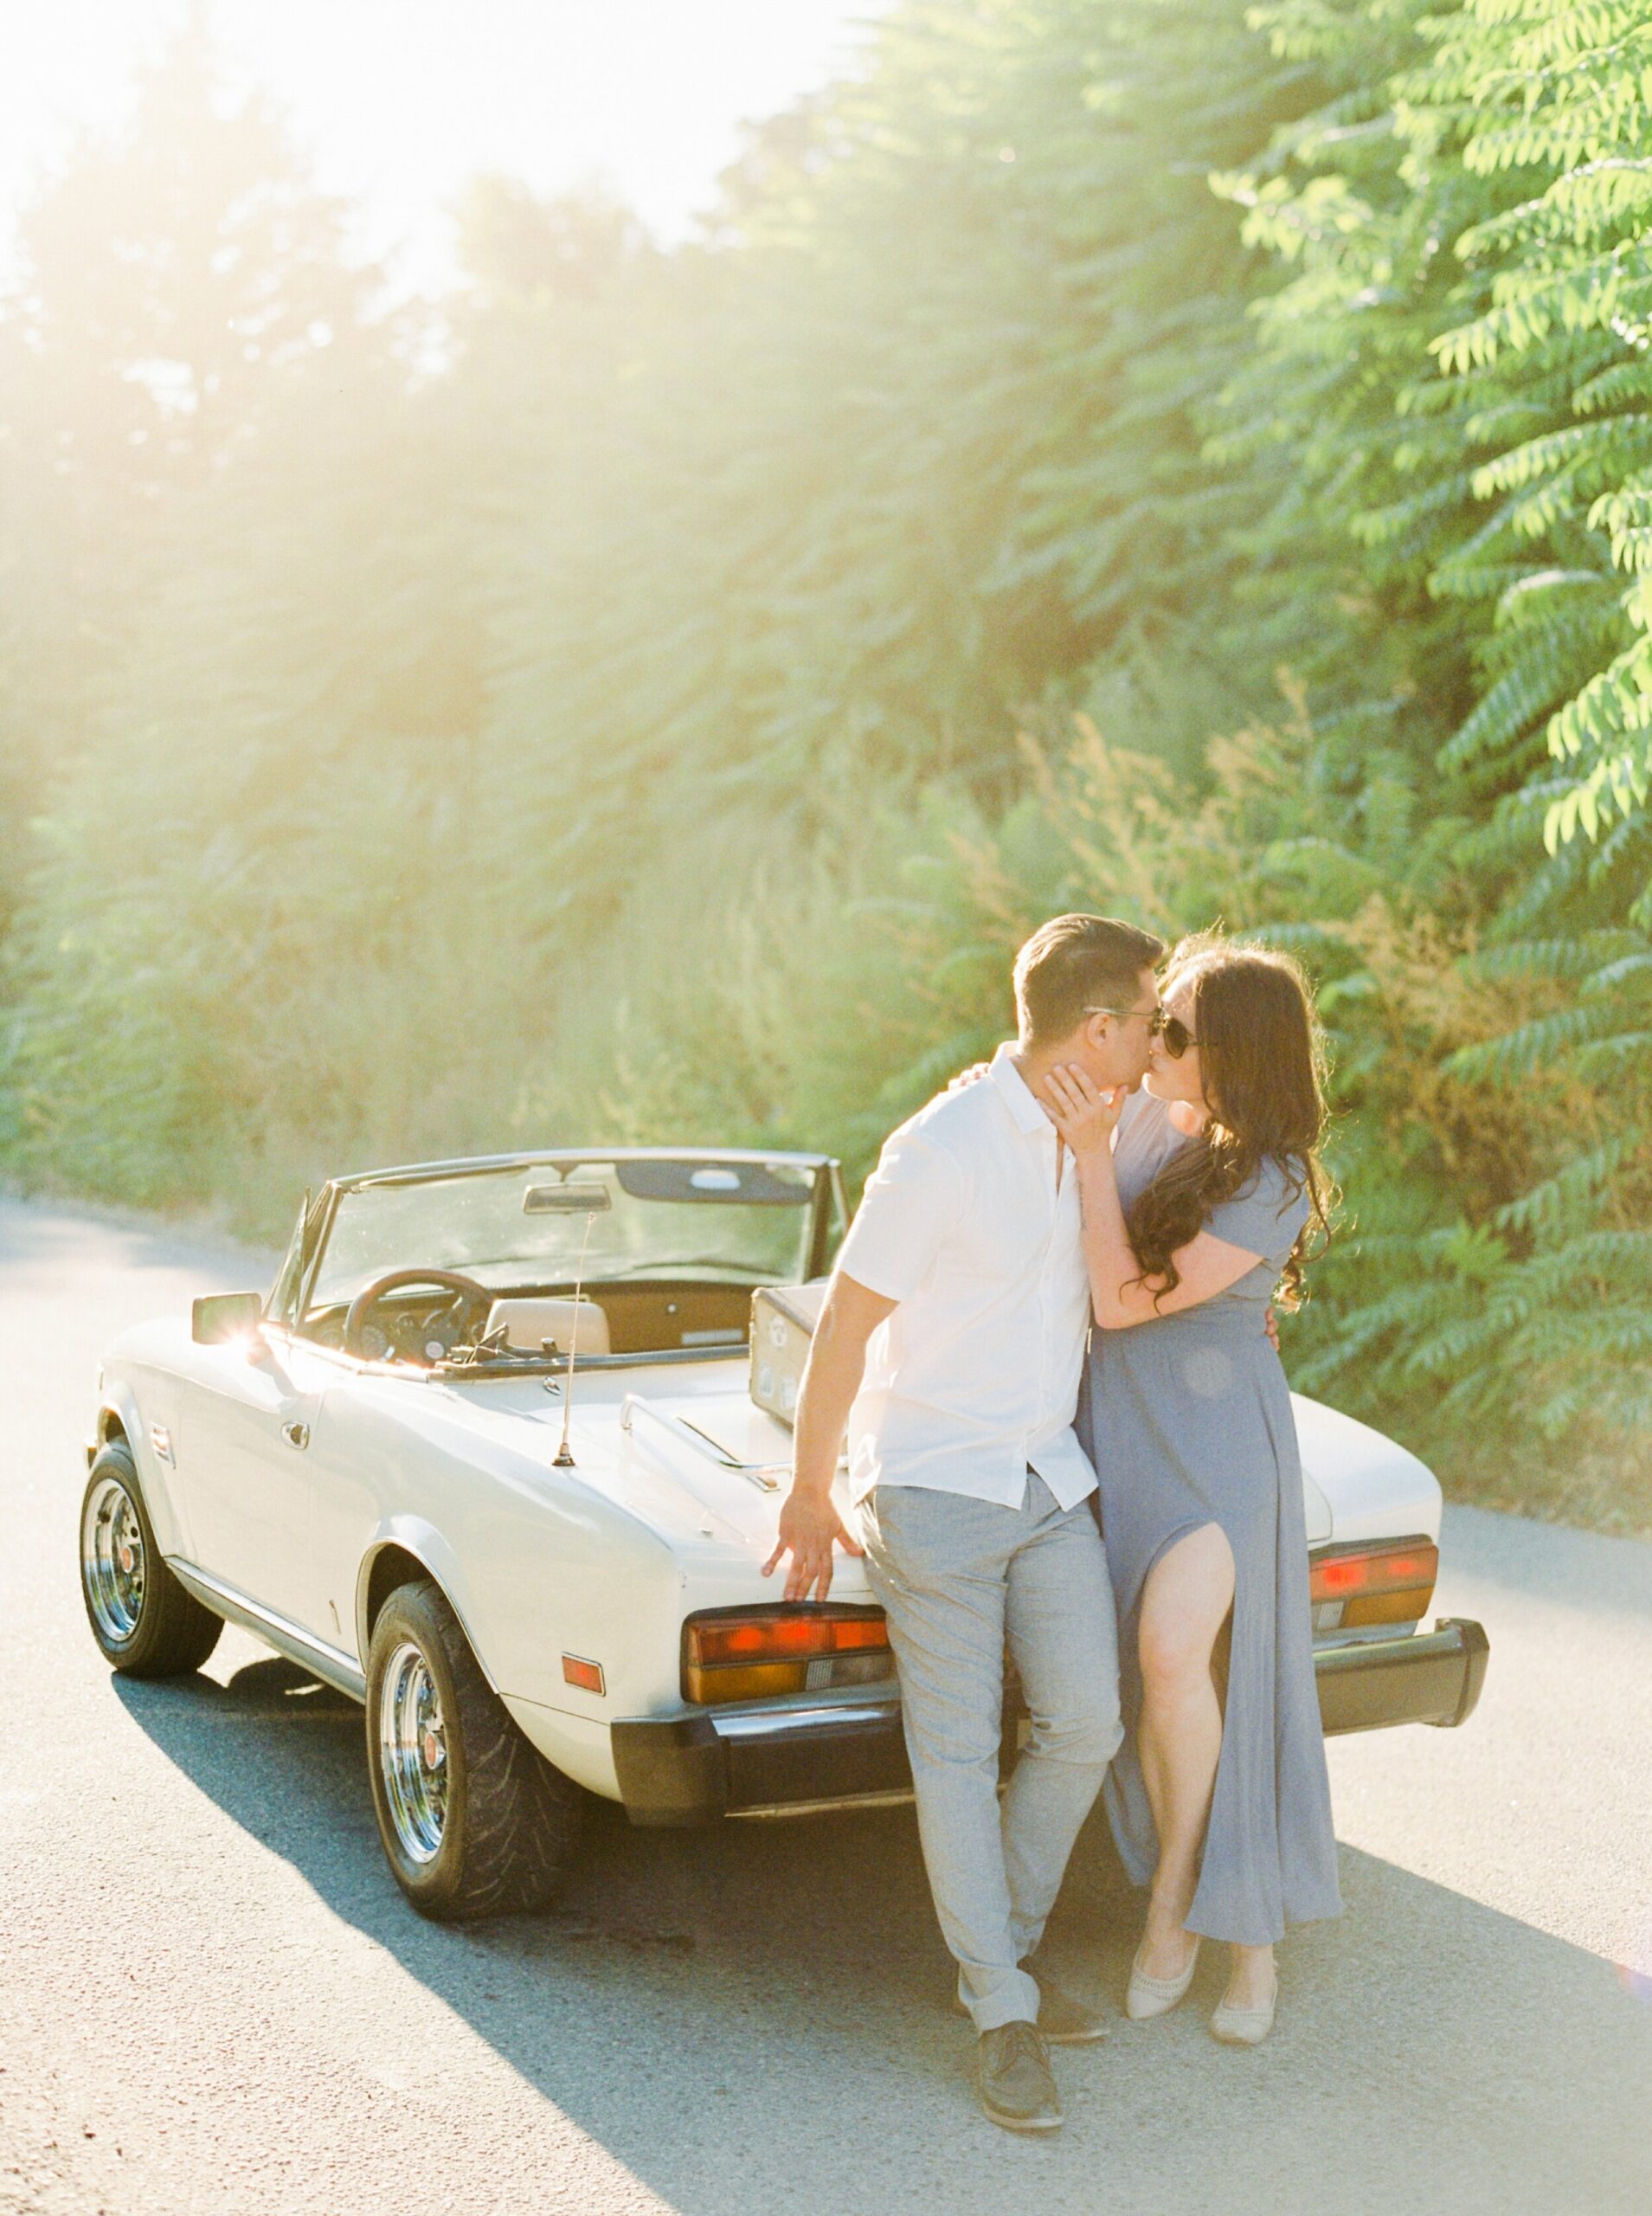  vintage white car and suitcase for a fun road trip in kelowna okanagan penticton vineyard on the naramata bench | summer engagement session | outfit ideas for couples photos | film photographer Jusitne Milton 